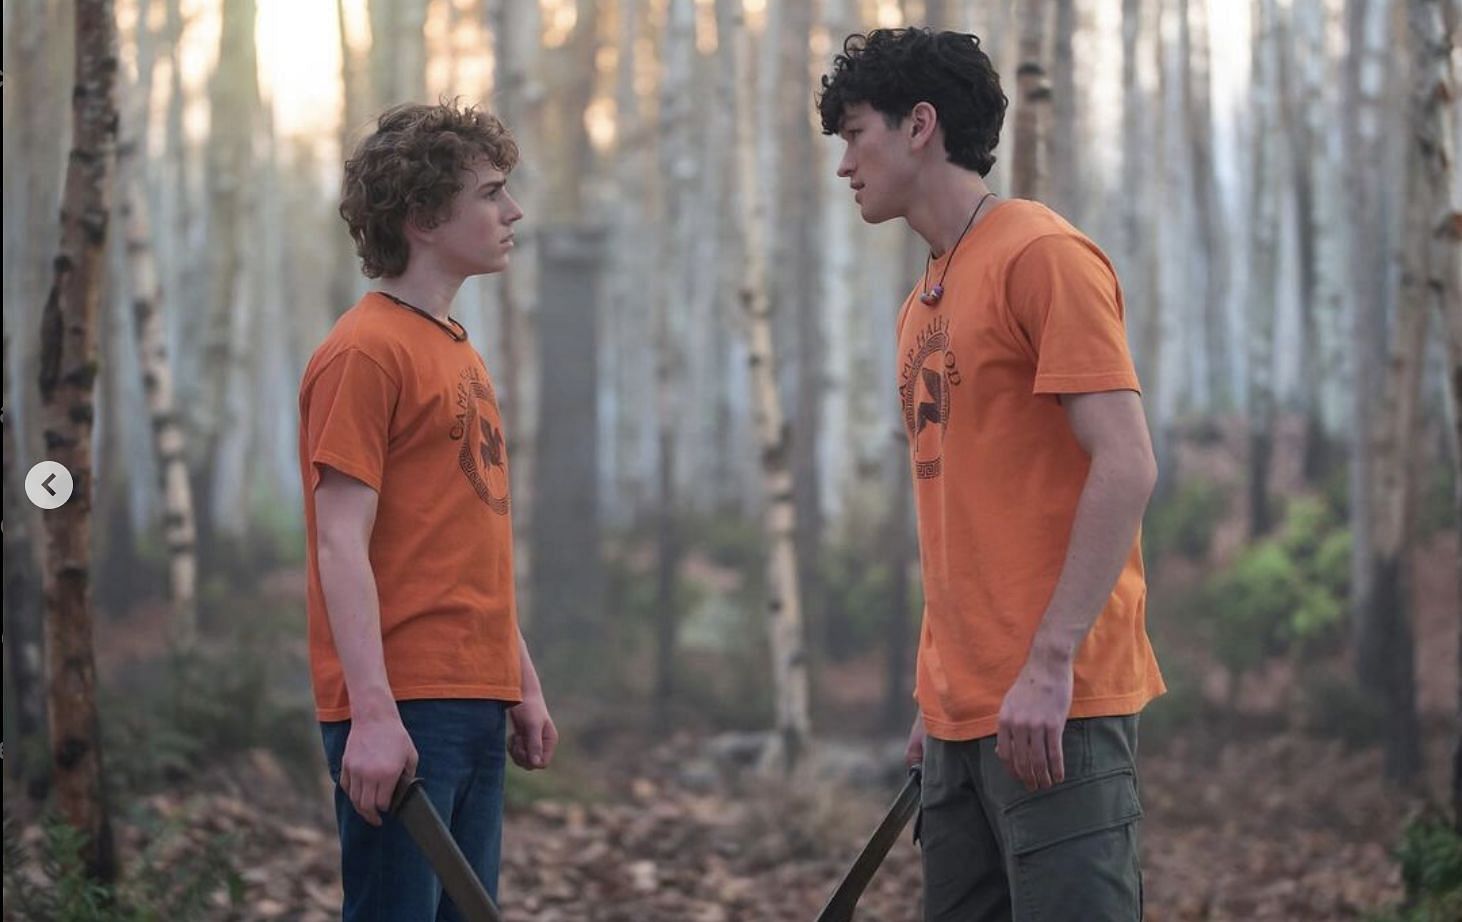 A still of Percy and Luke from the show. (Image via Instagram/@charliebushnell)